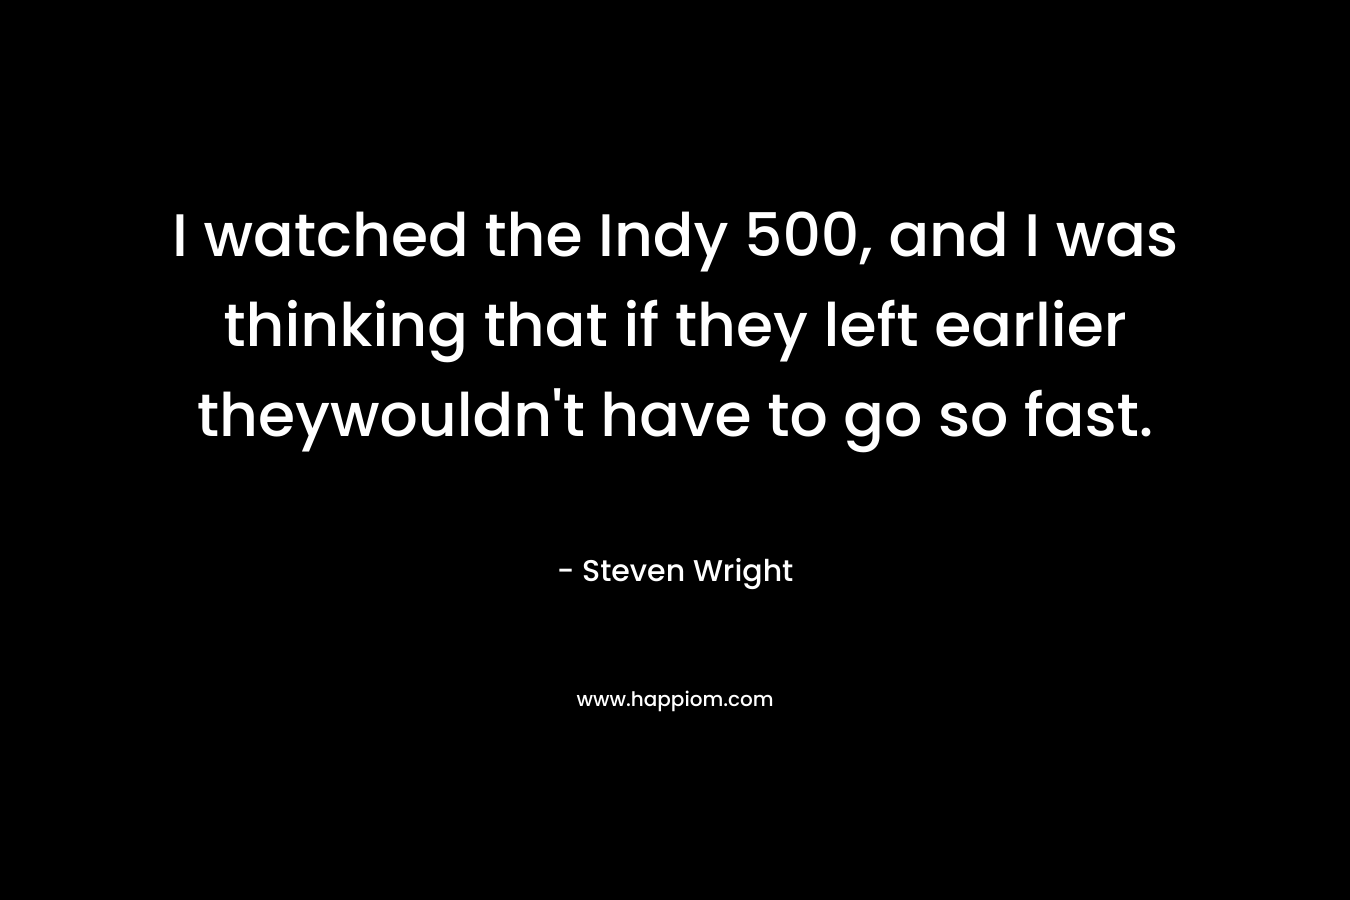 I watched the Indy 500, and I was thinking that if they left earlier theywouldn't have to go so fast.